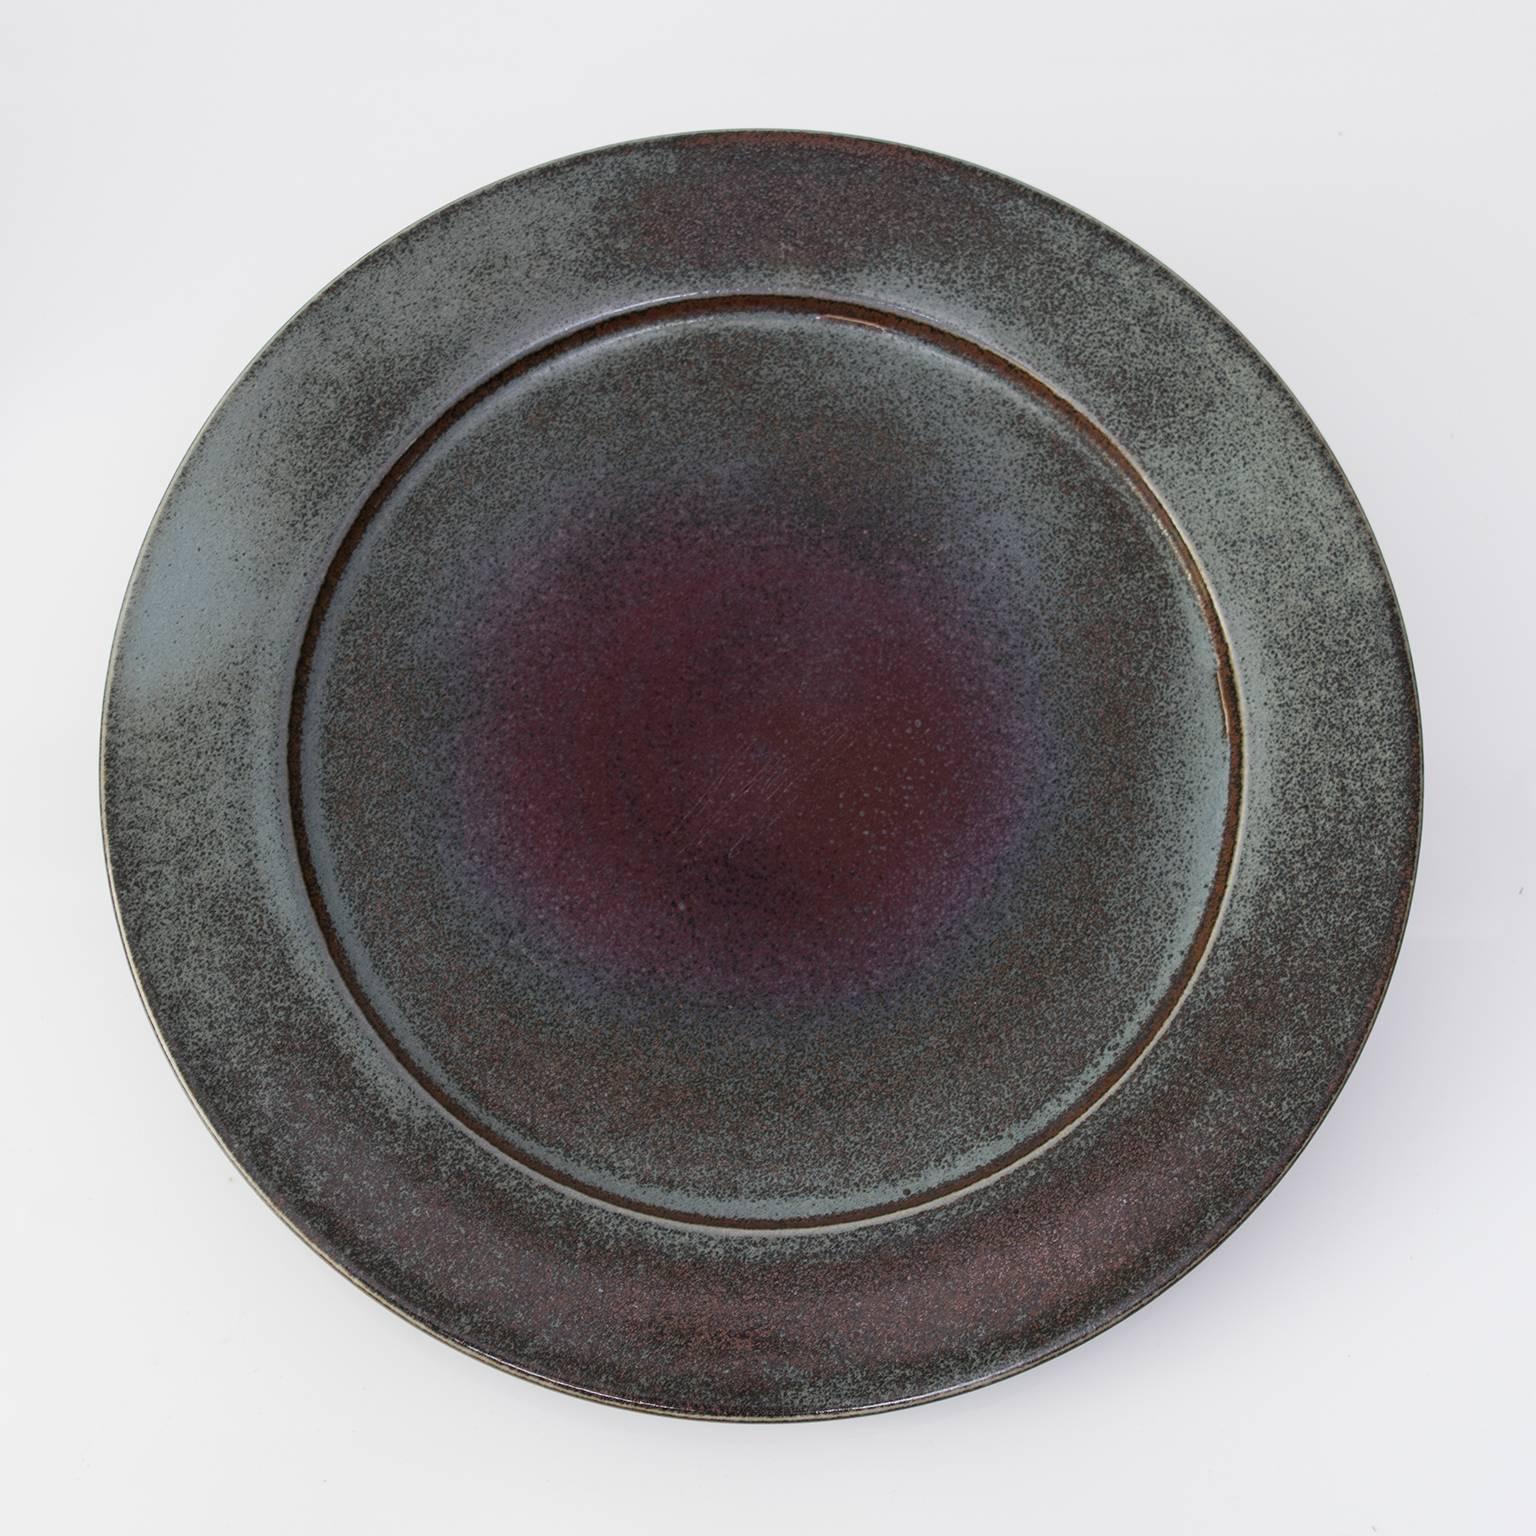 A large unique studio piece by Swedish ceramists Stig Lindberg. This piece is masterfully thrown and glazed with rich to subtle color shifts. This ceramic charger has a low profile and a recessed foot which gives it a hovering effect. Signed on the